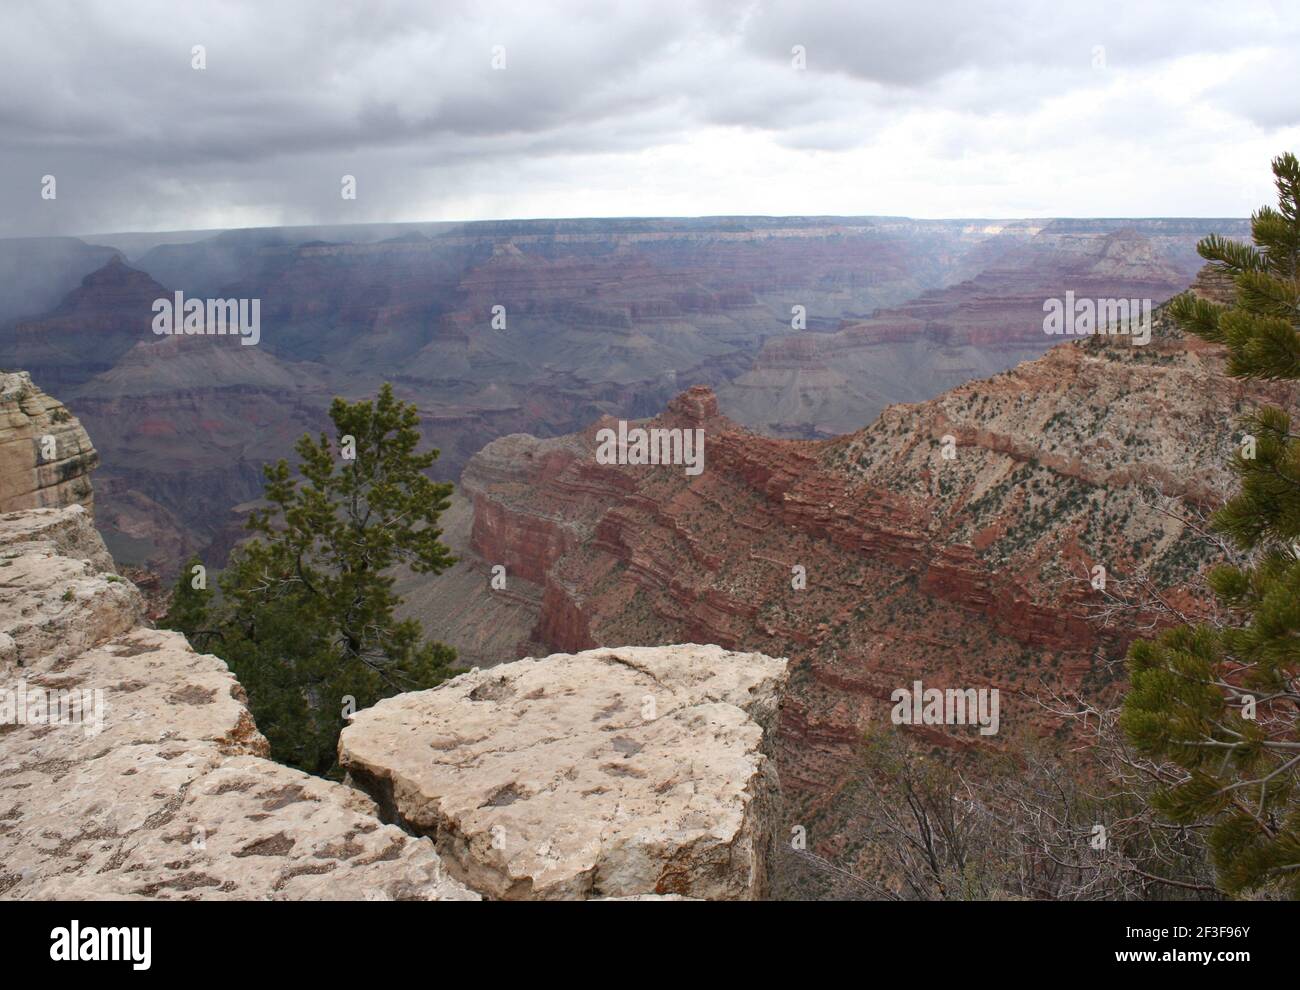 A landscape view of the Pipe Creek Vista in the USA on a cloudy day background Stock Photo